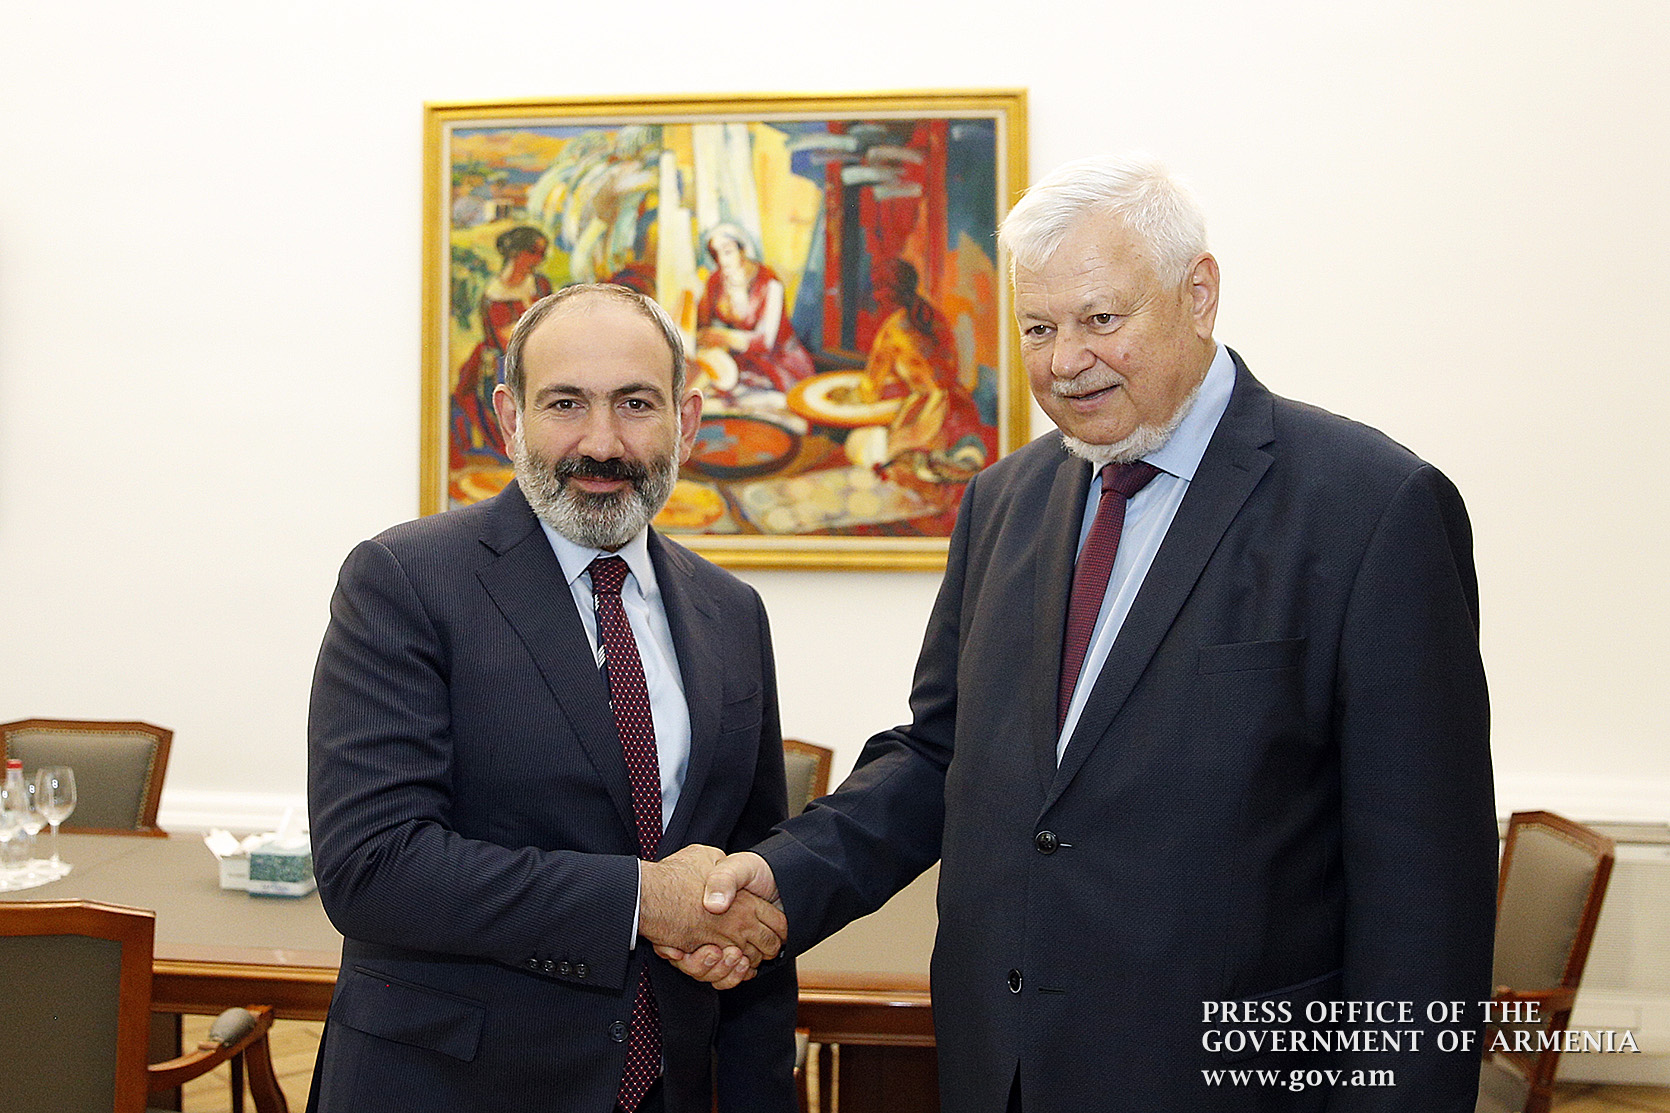 Pashinyan and OSCE Representative discussed Karabakh conflict resolution process